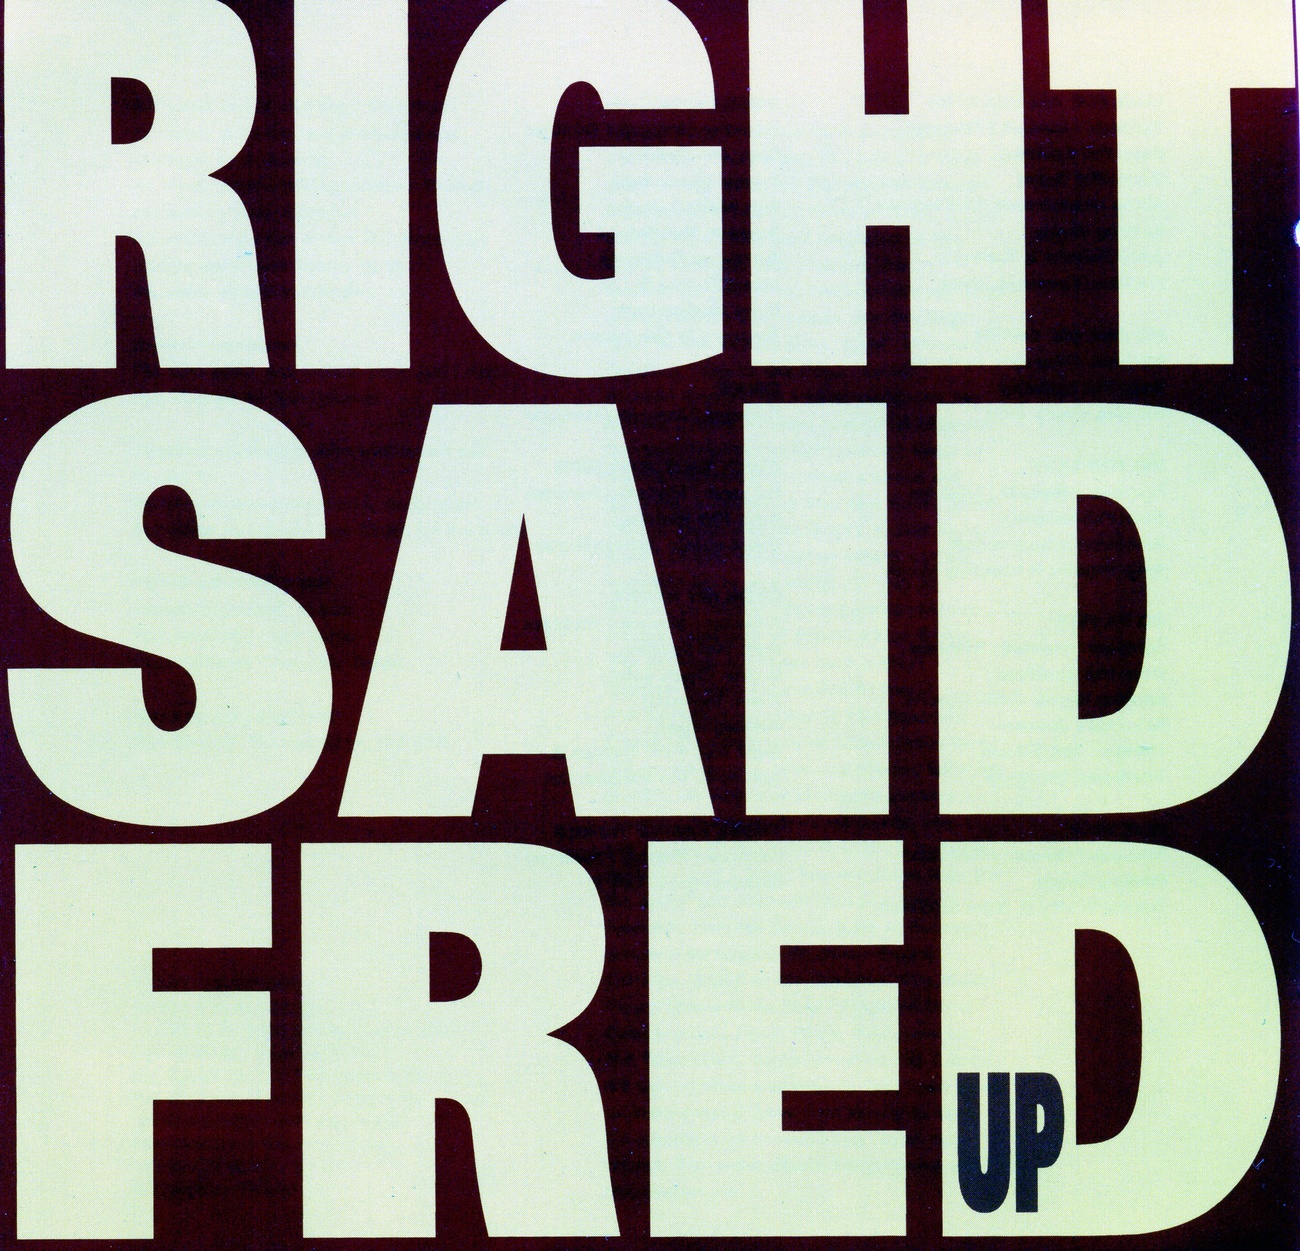 I said right foot текст. Right said Fred "up". Стенд Fred. Right said Fred Kiss. Can't Stand losing you the Police.